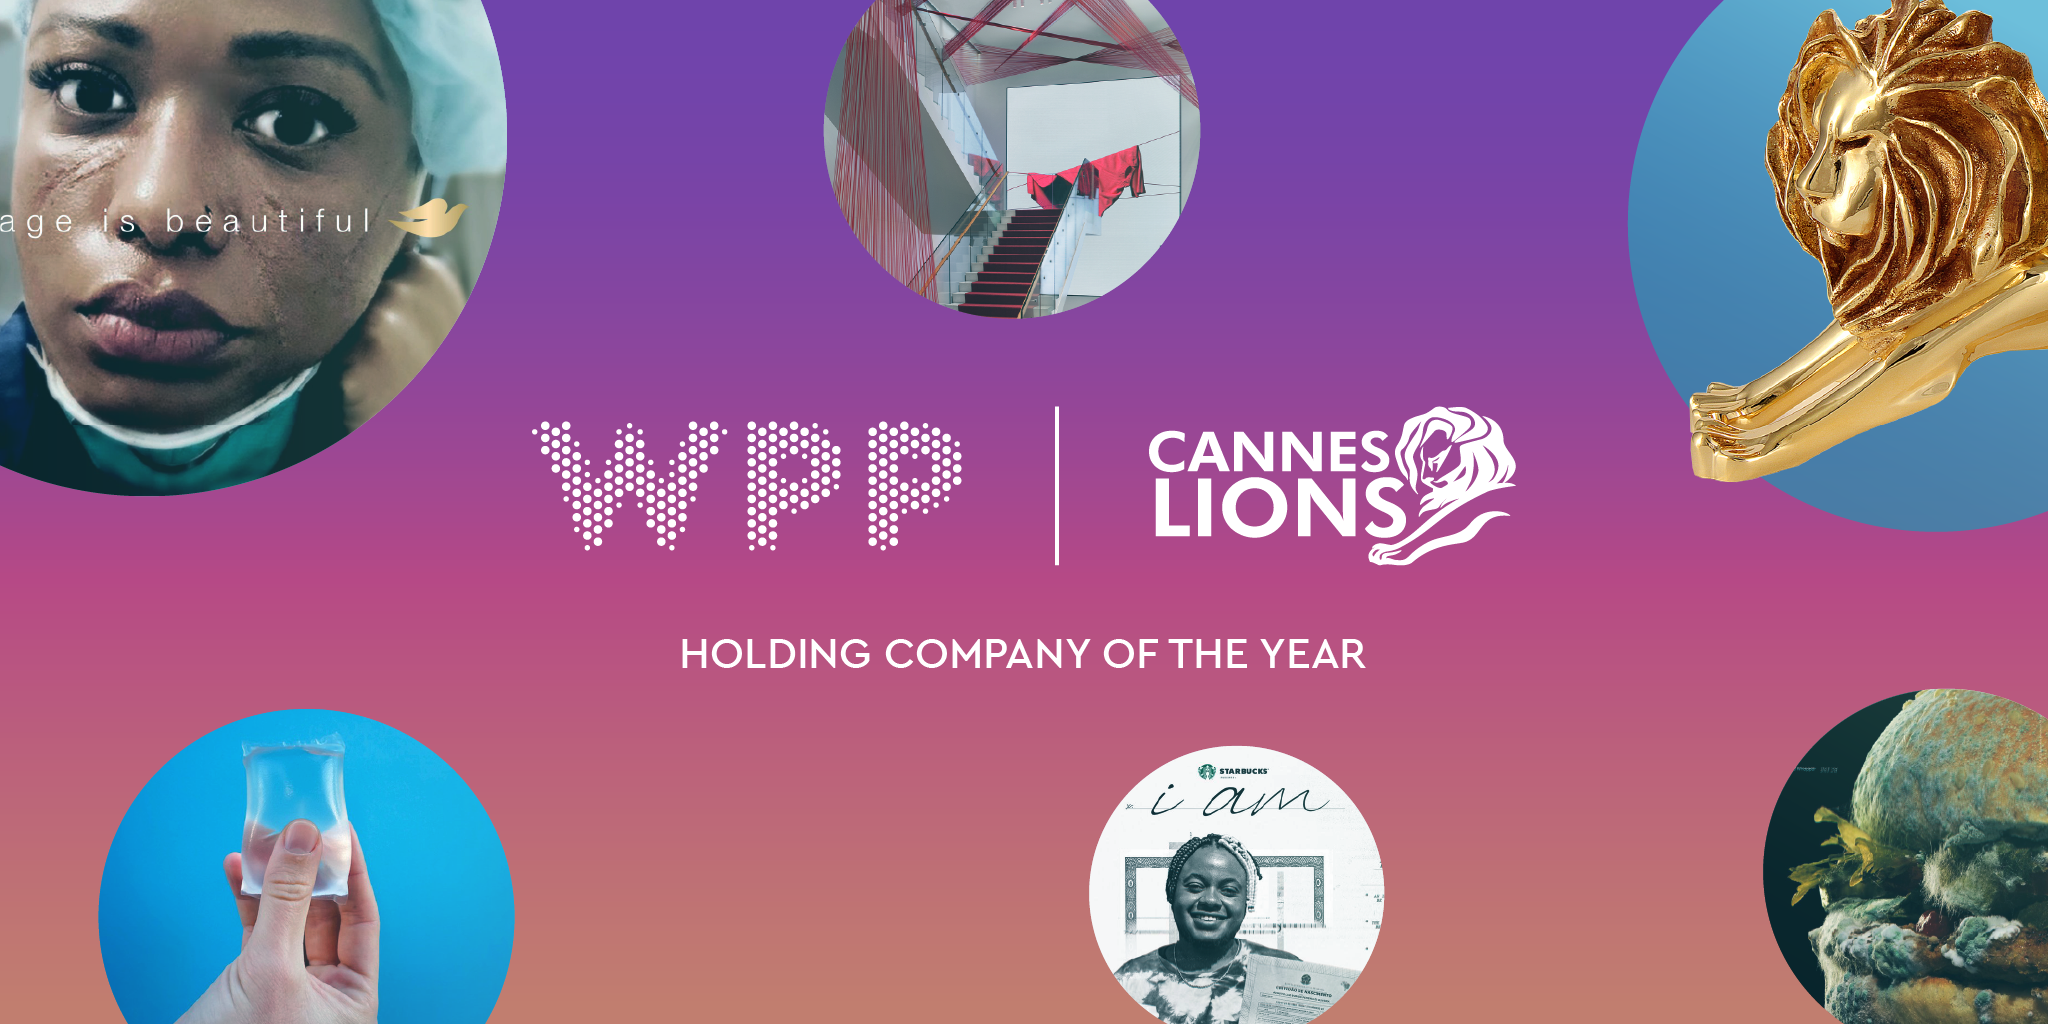 WPP wins industry’s most creative company at Cannes Lions WPP